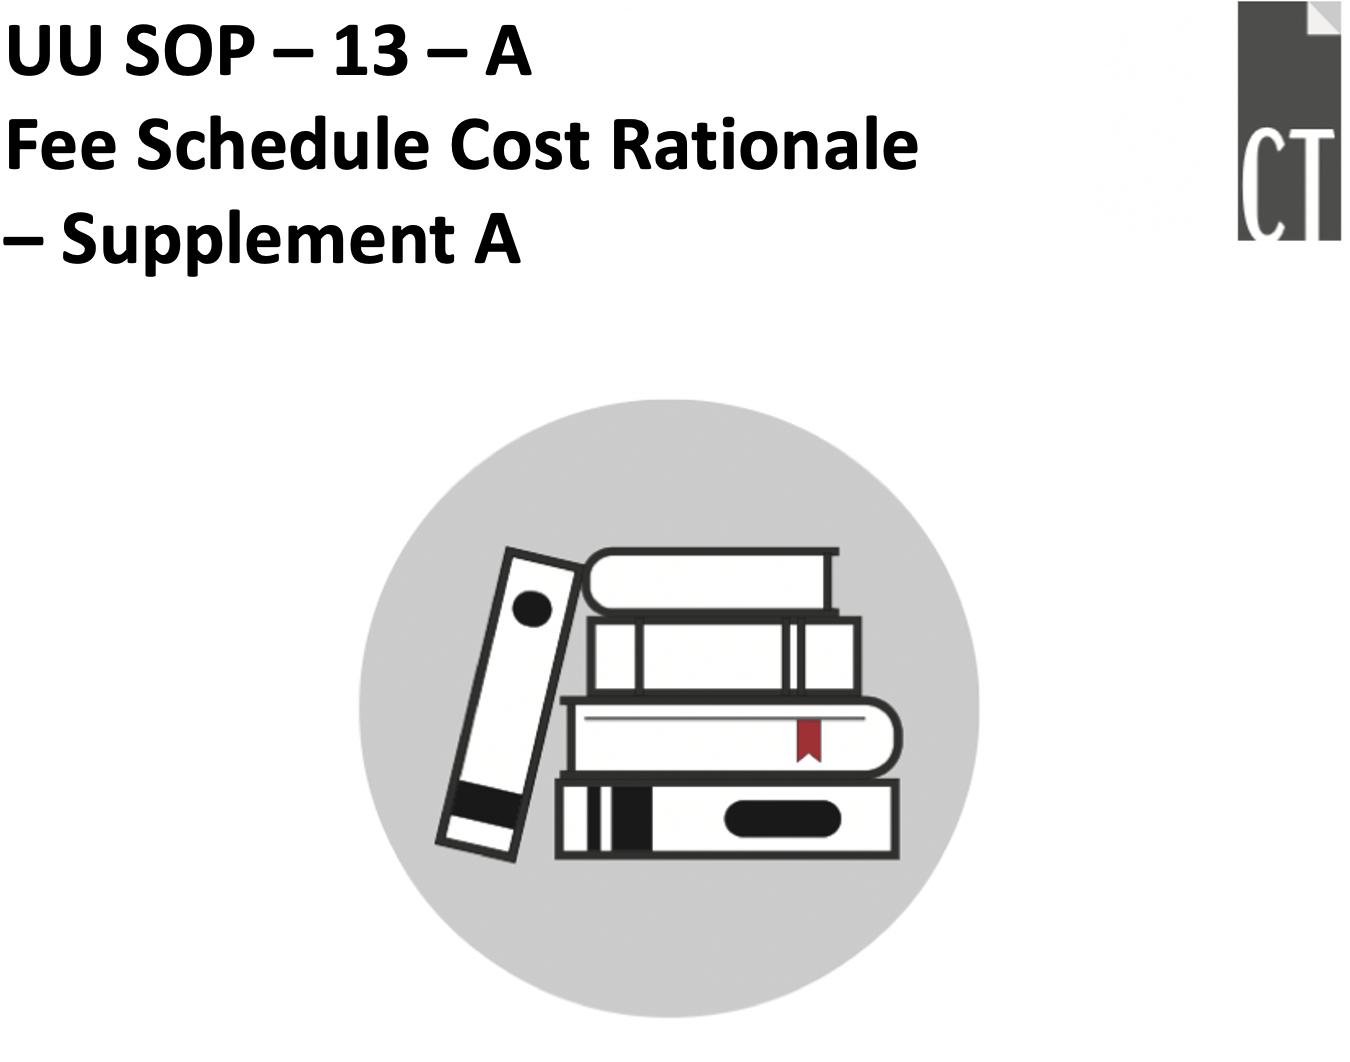 UUSOP 13A Fee Schedule Cost Rationale – Supplement A